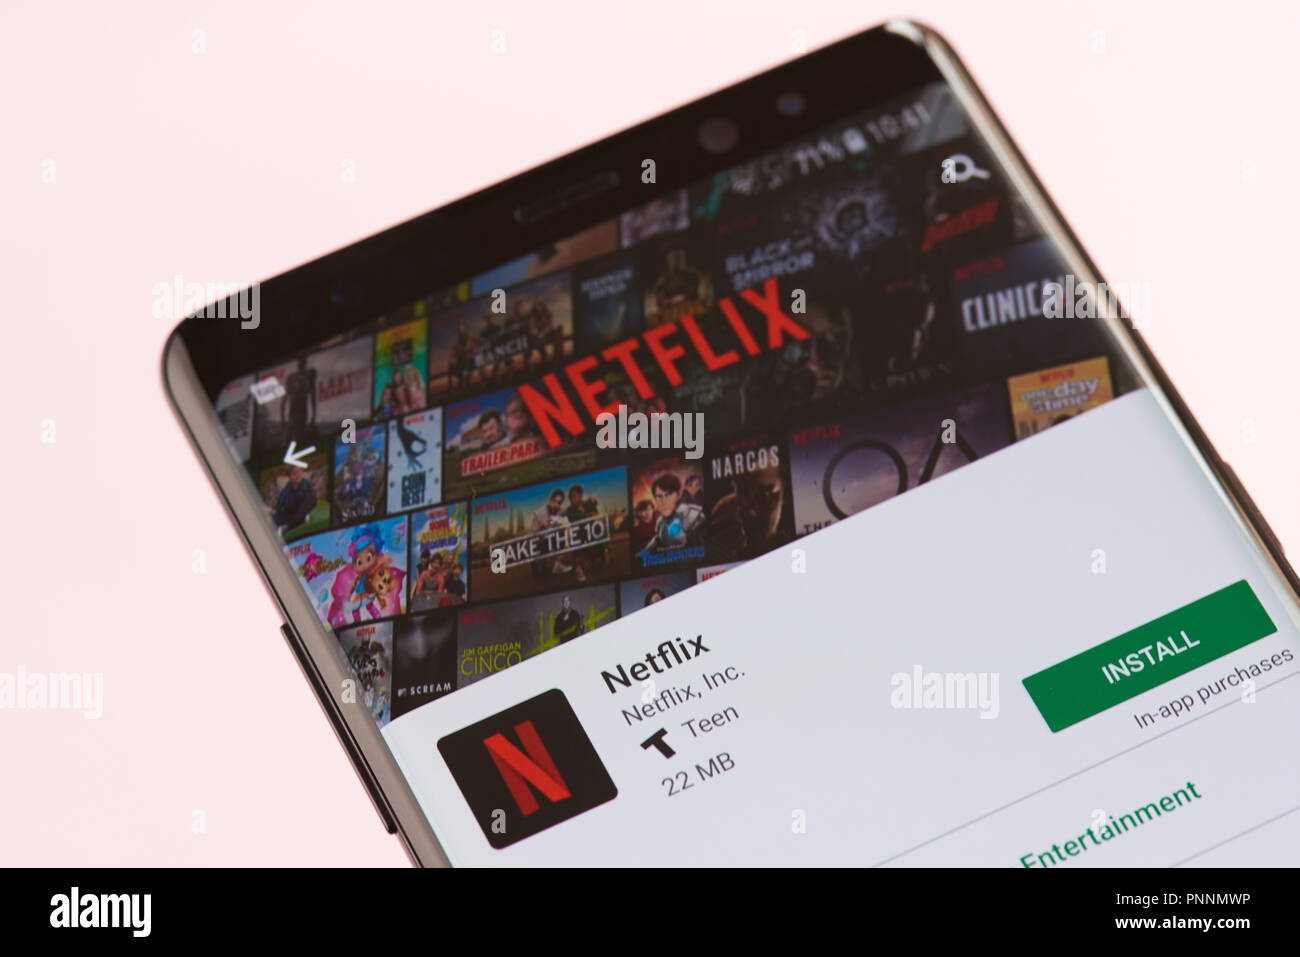 New york, USA - september 21, 2018: Netflix in google market on smartphone screen background close up view Stock Photo